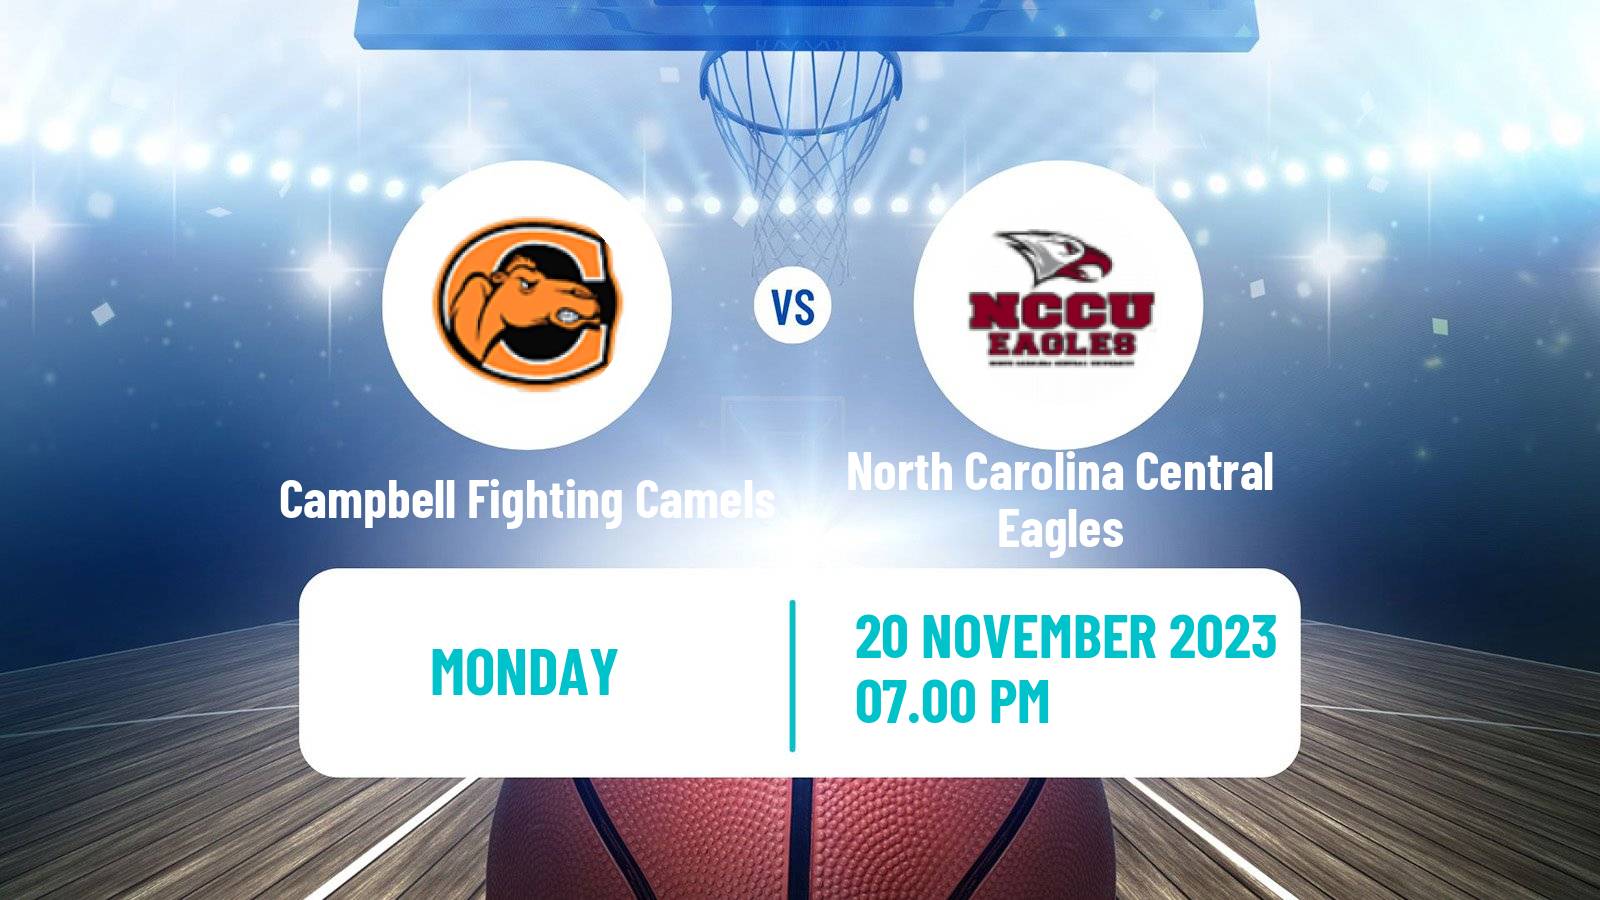 Basketball NCAA College Basketball Campbell Fighting Camels - North Carolina Central Eagles